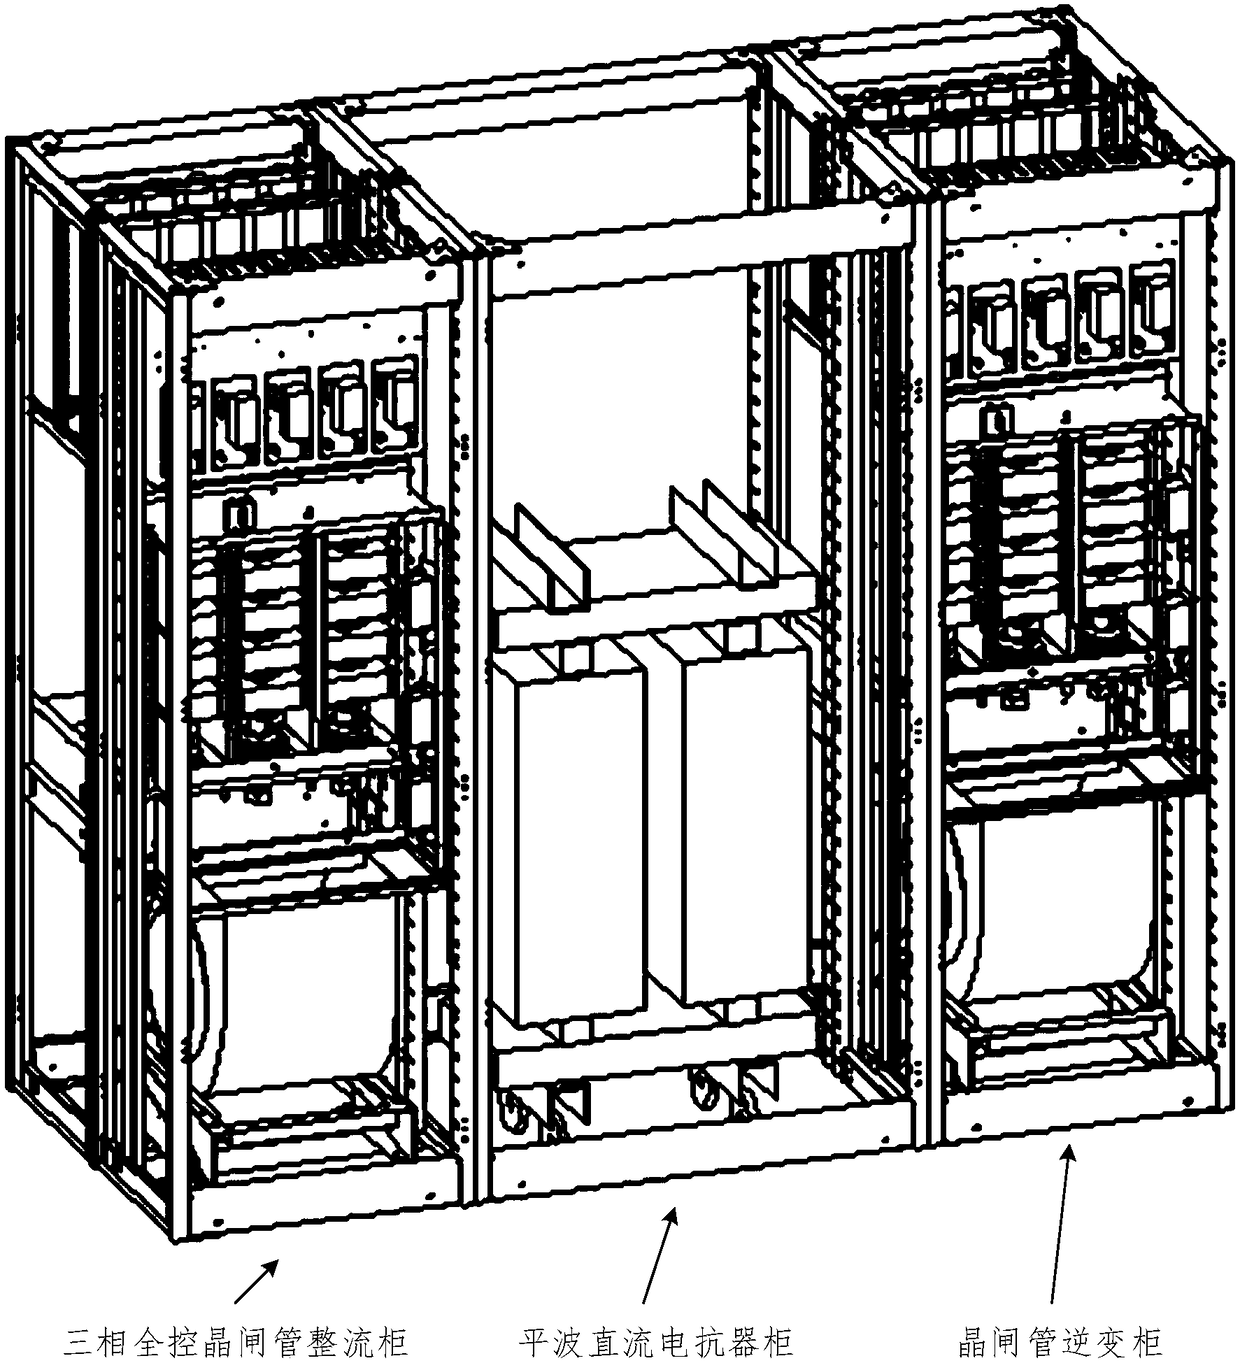 A power cabinet for static frequency conversion starting of a large-capacity synchronous machine